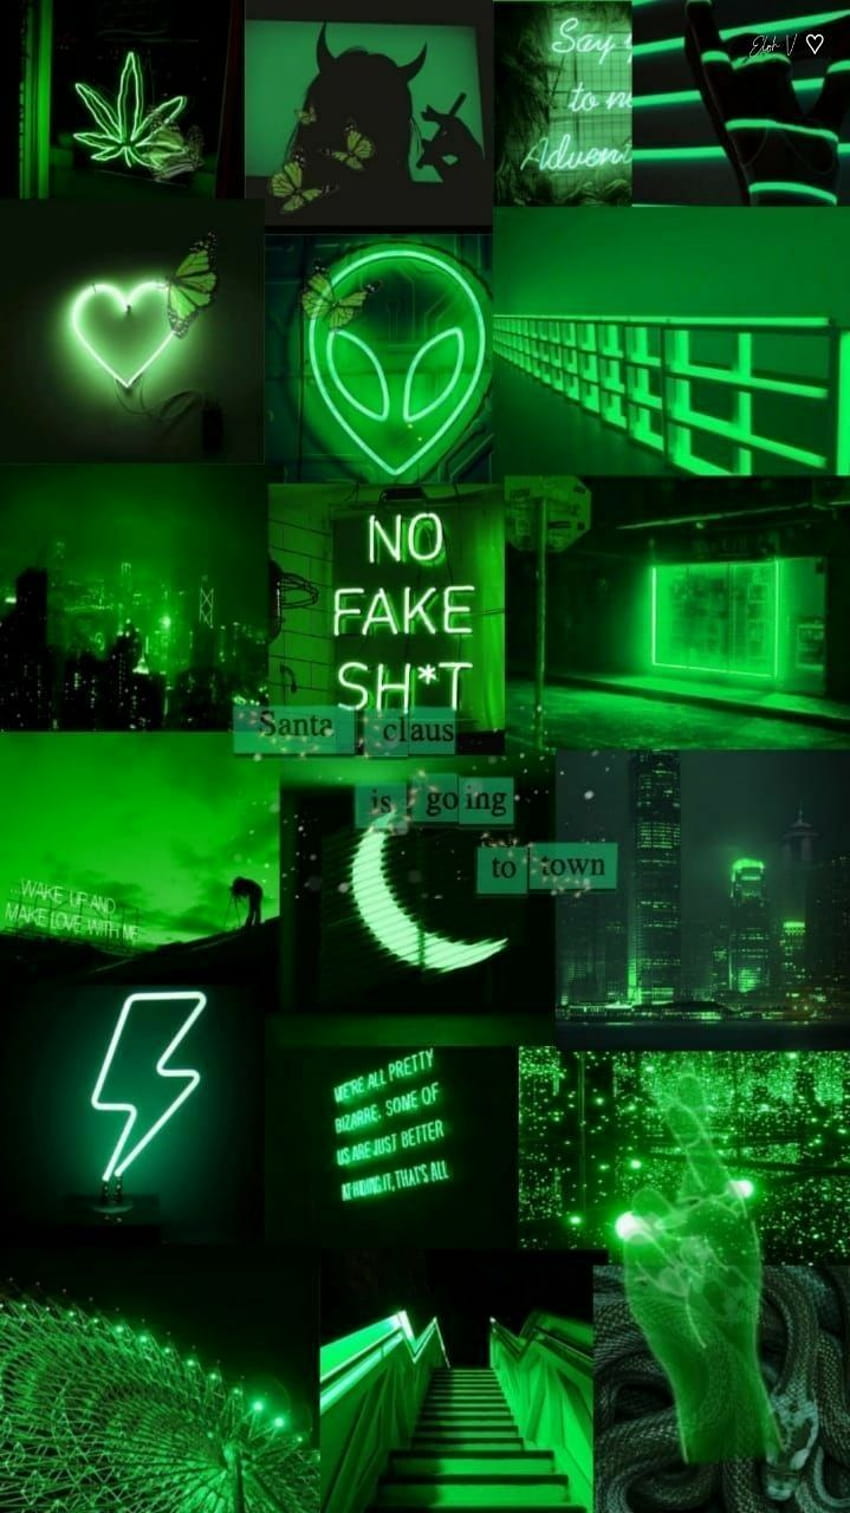 A collection of green neon lights and alien images - Neon green